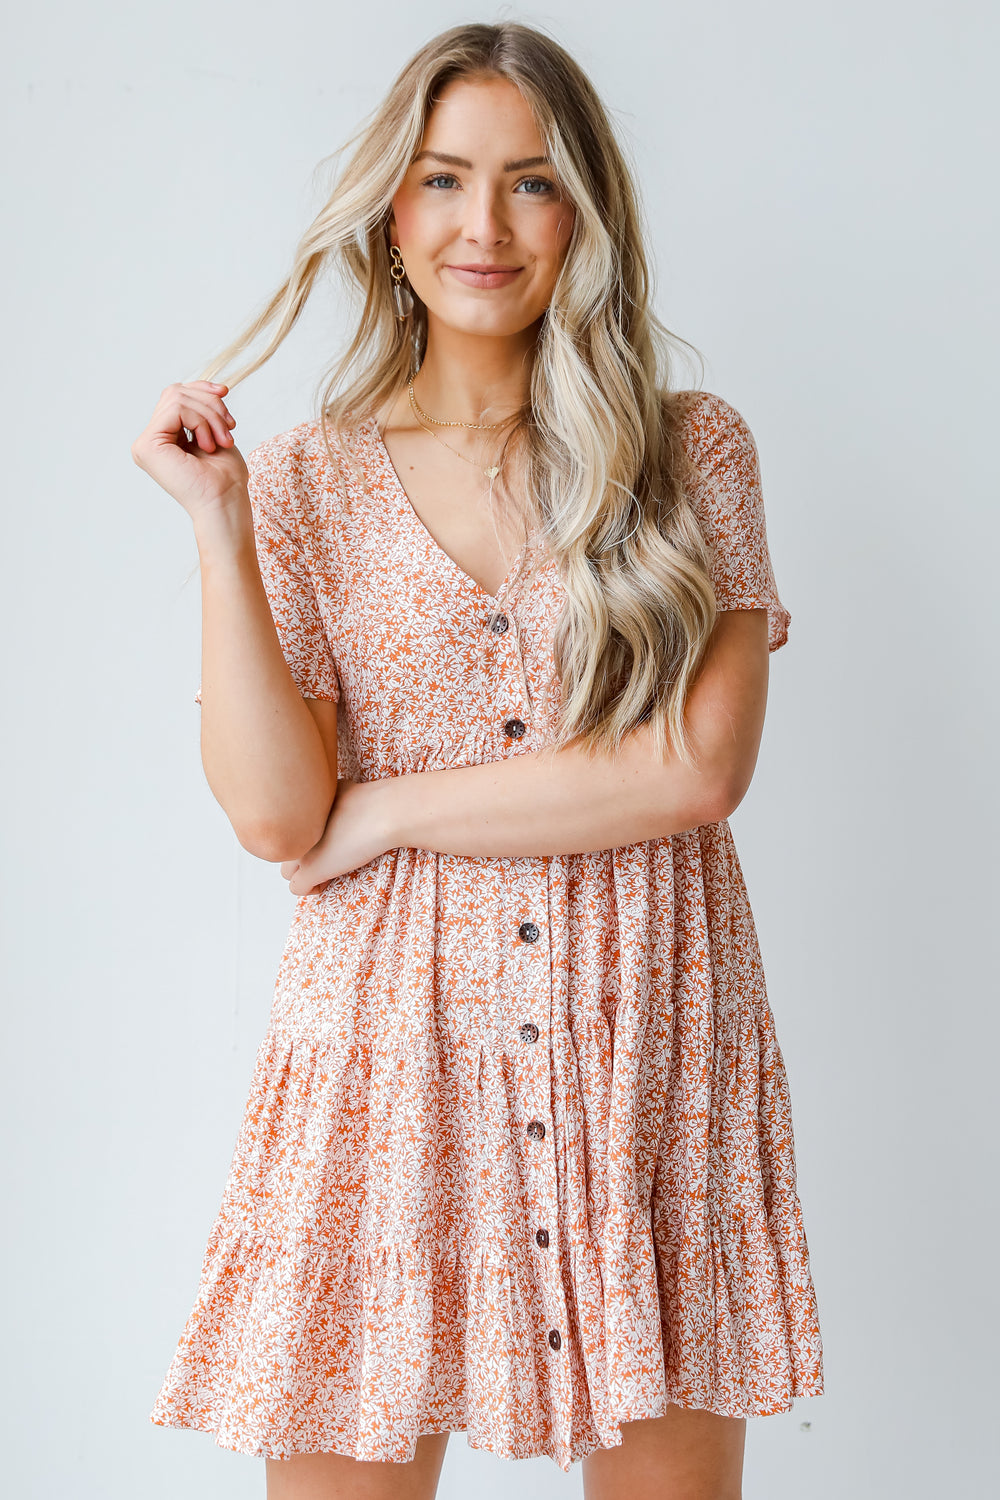 Floral Babydoll Dress from dress up